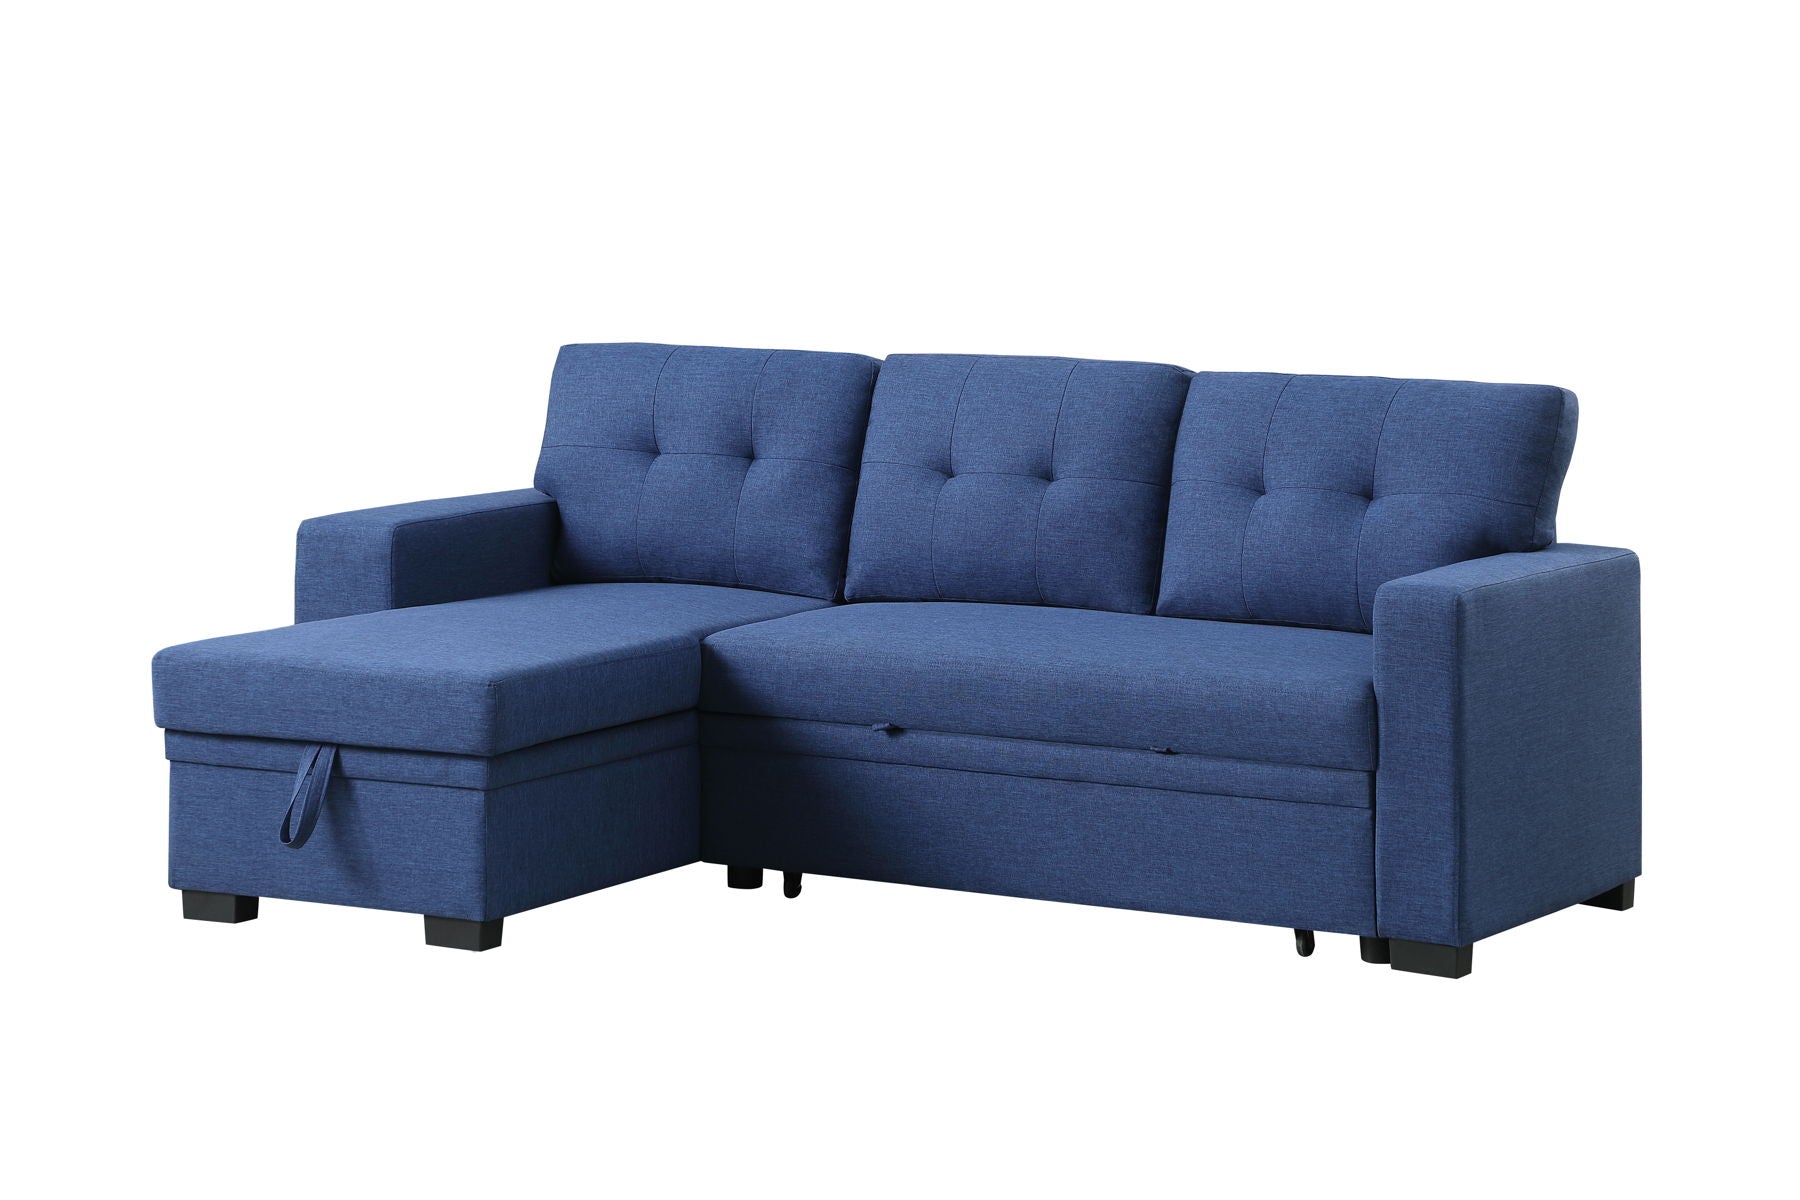 3 Piece Upholstered Sectional